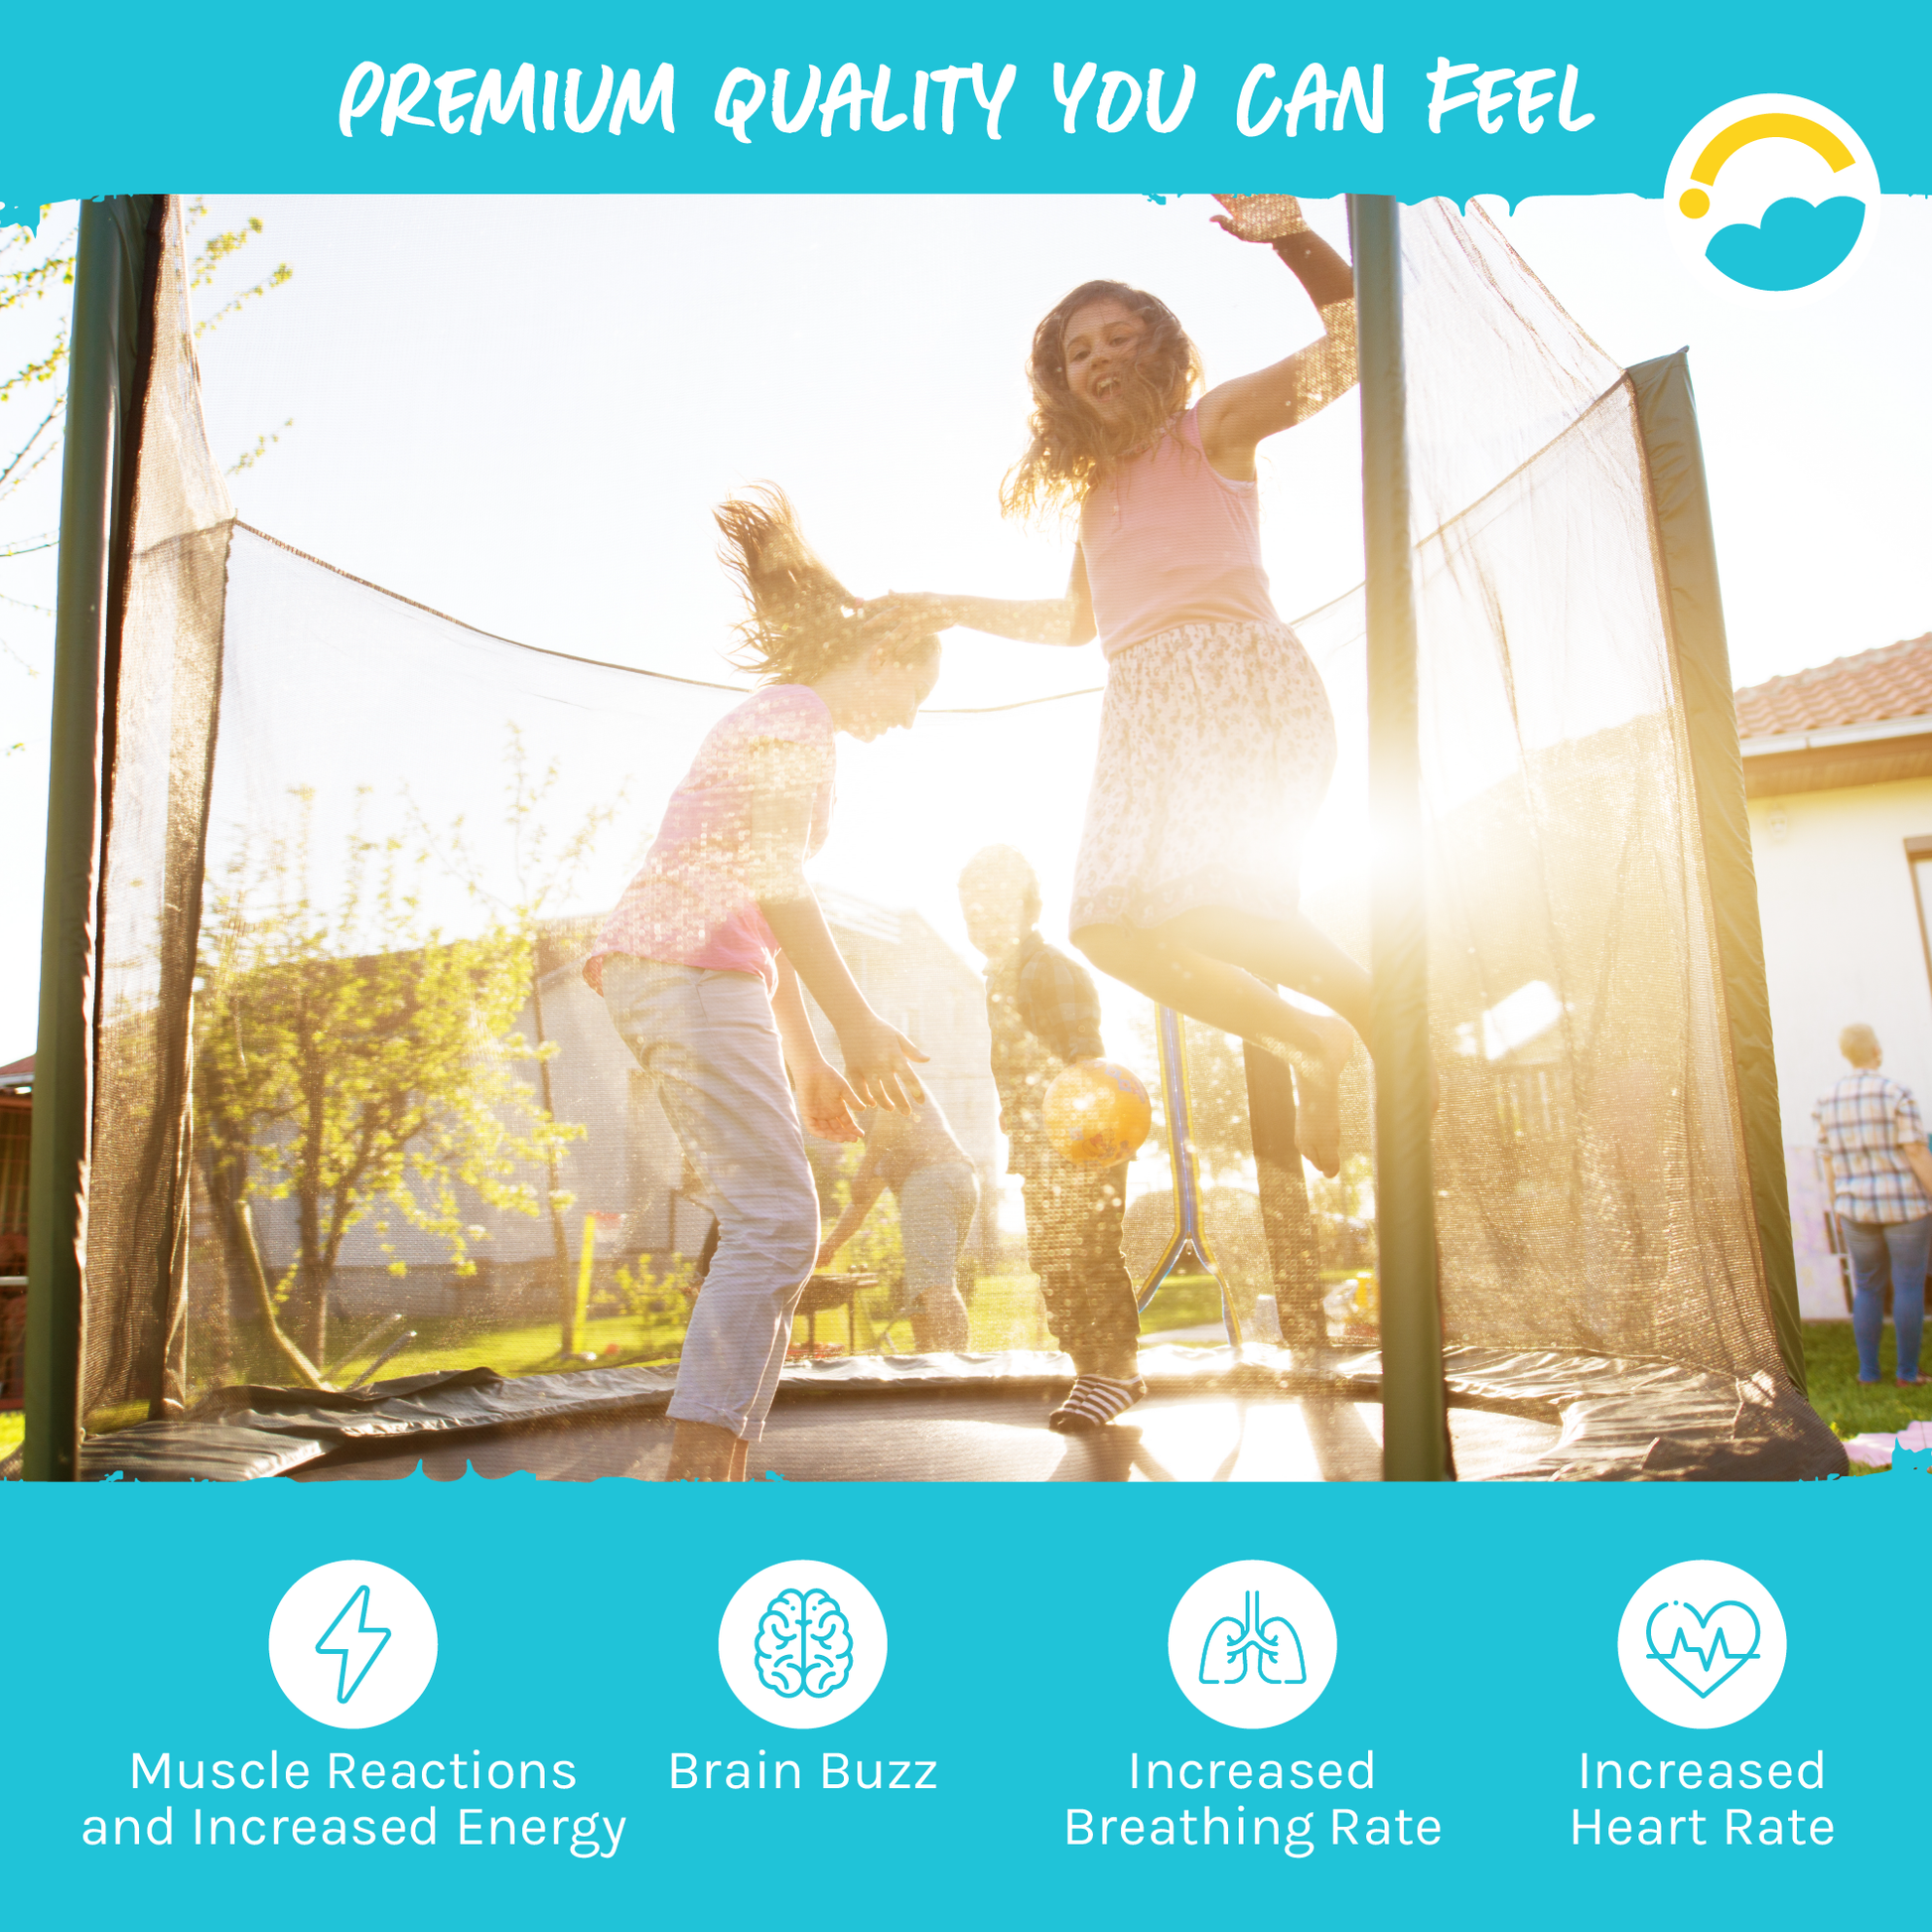 Premium Quality you can Feel:  Product will help with Muscle Reactions and Increased Energy, Brain Buzz, Increased Breathing Rate, and Increased Heart Rate.  